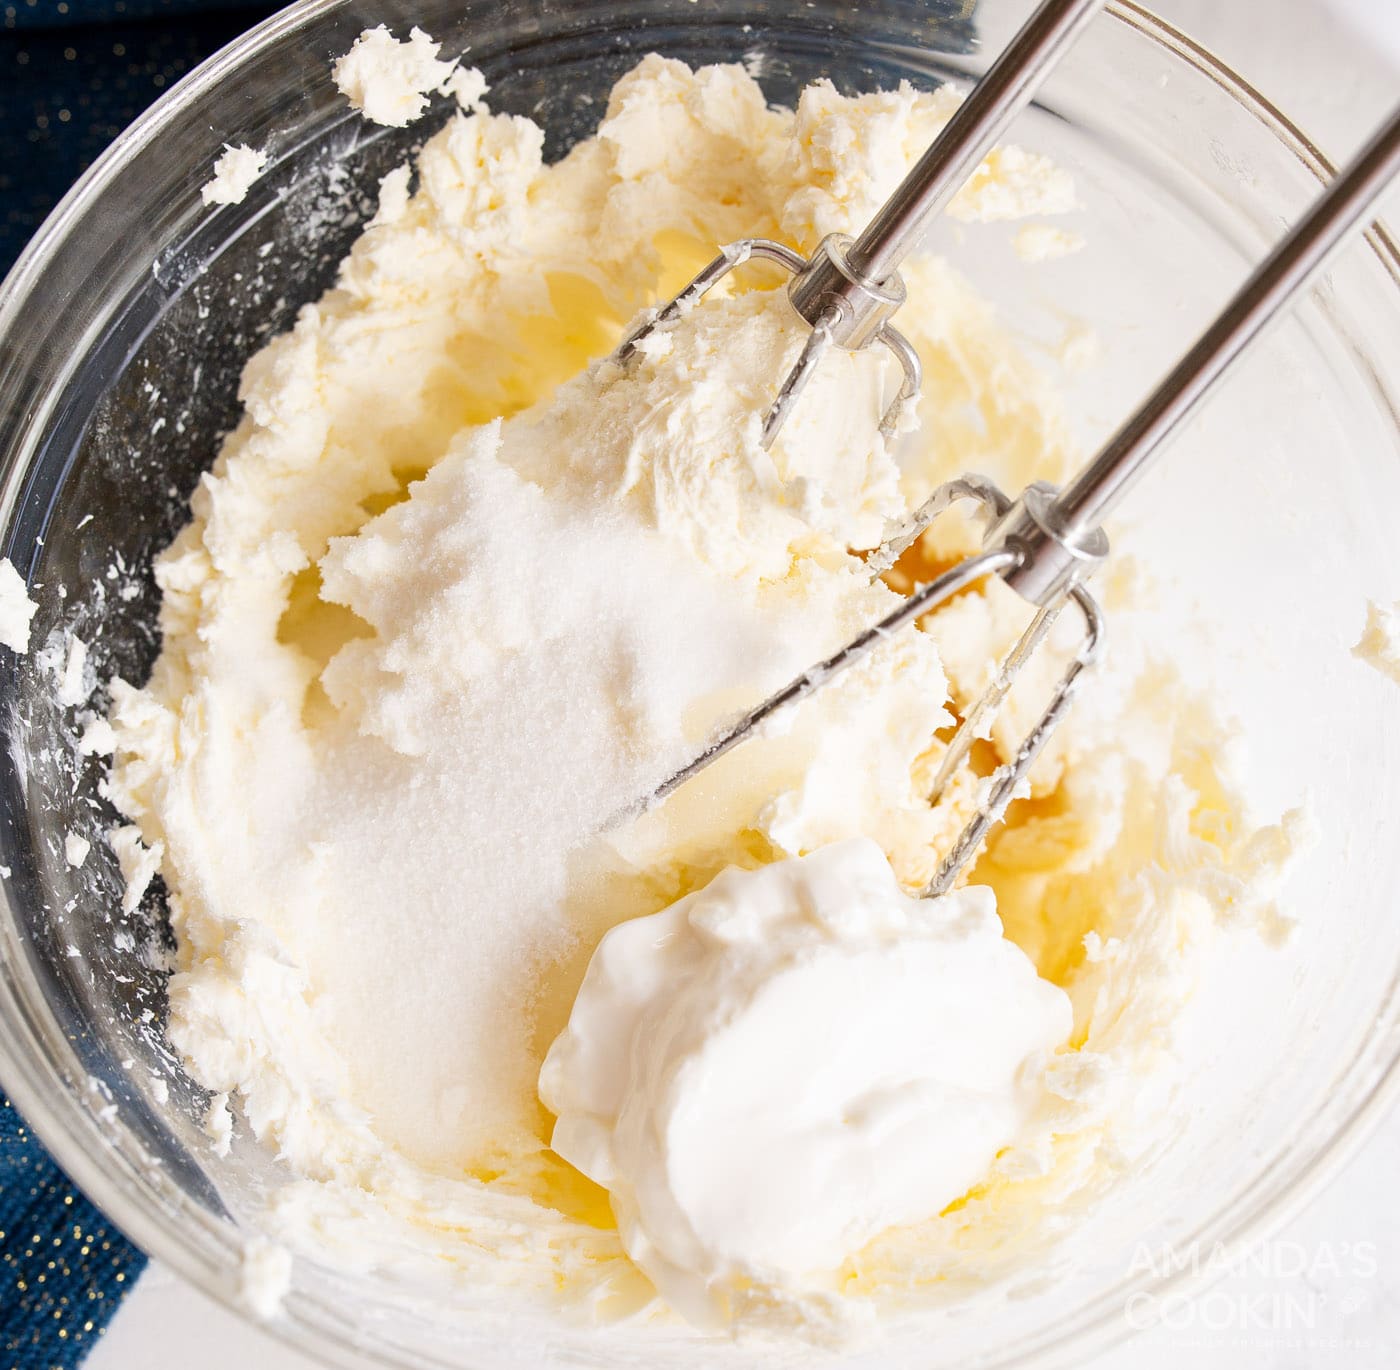 beating cheesecake ingredients with a hand mixer